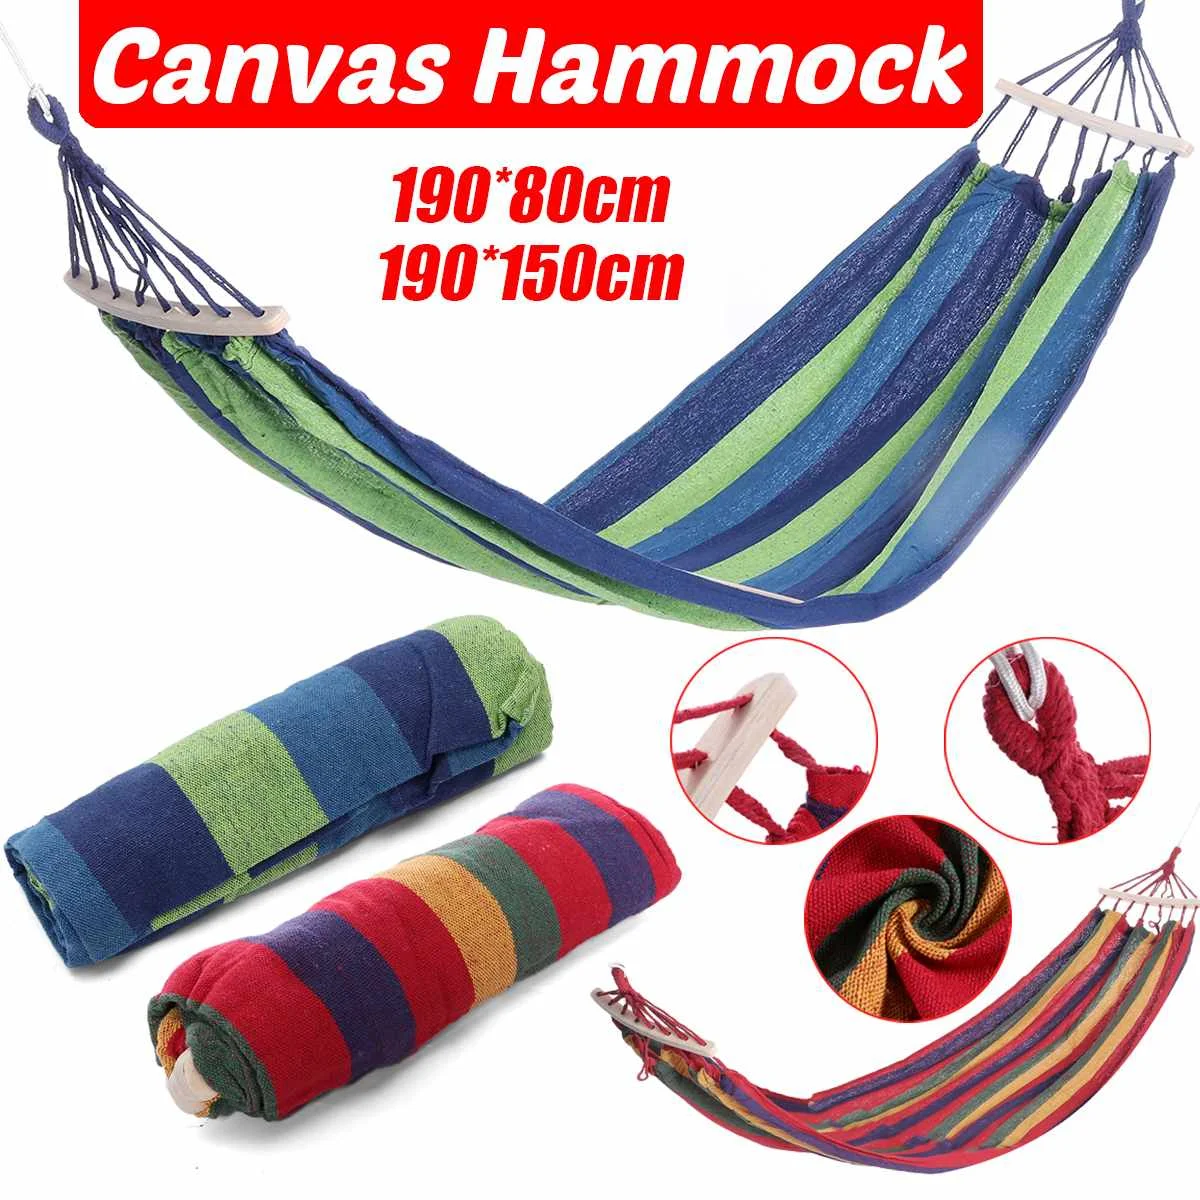 

Outdoor Hammock Bed Canvas Garden Swing Chair Portable Travel Picnic Camping Hanging Bed 190x80cm/190X150cm